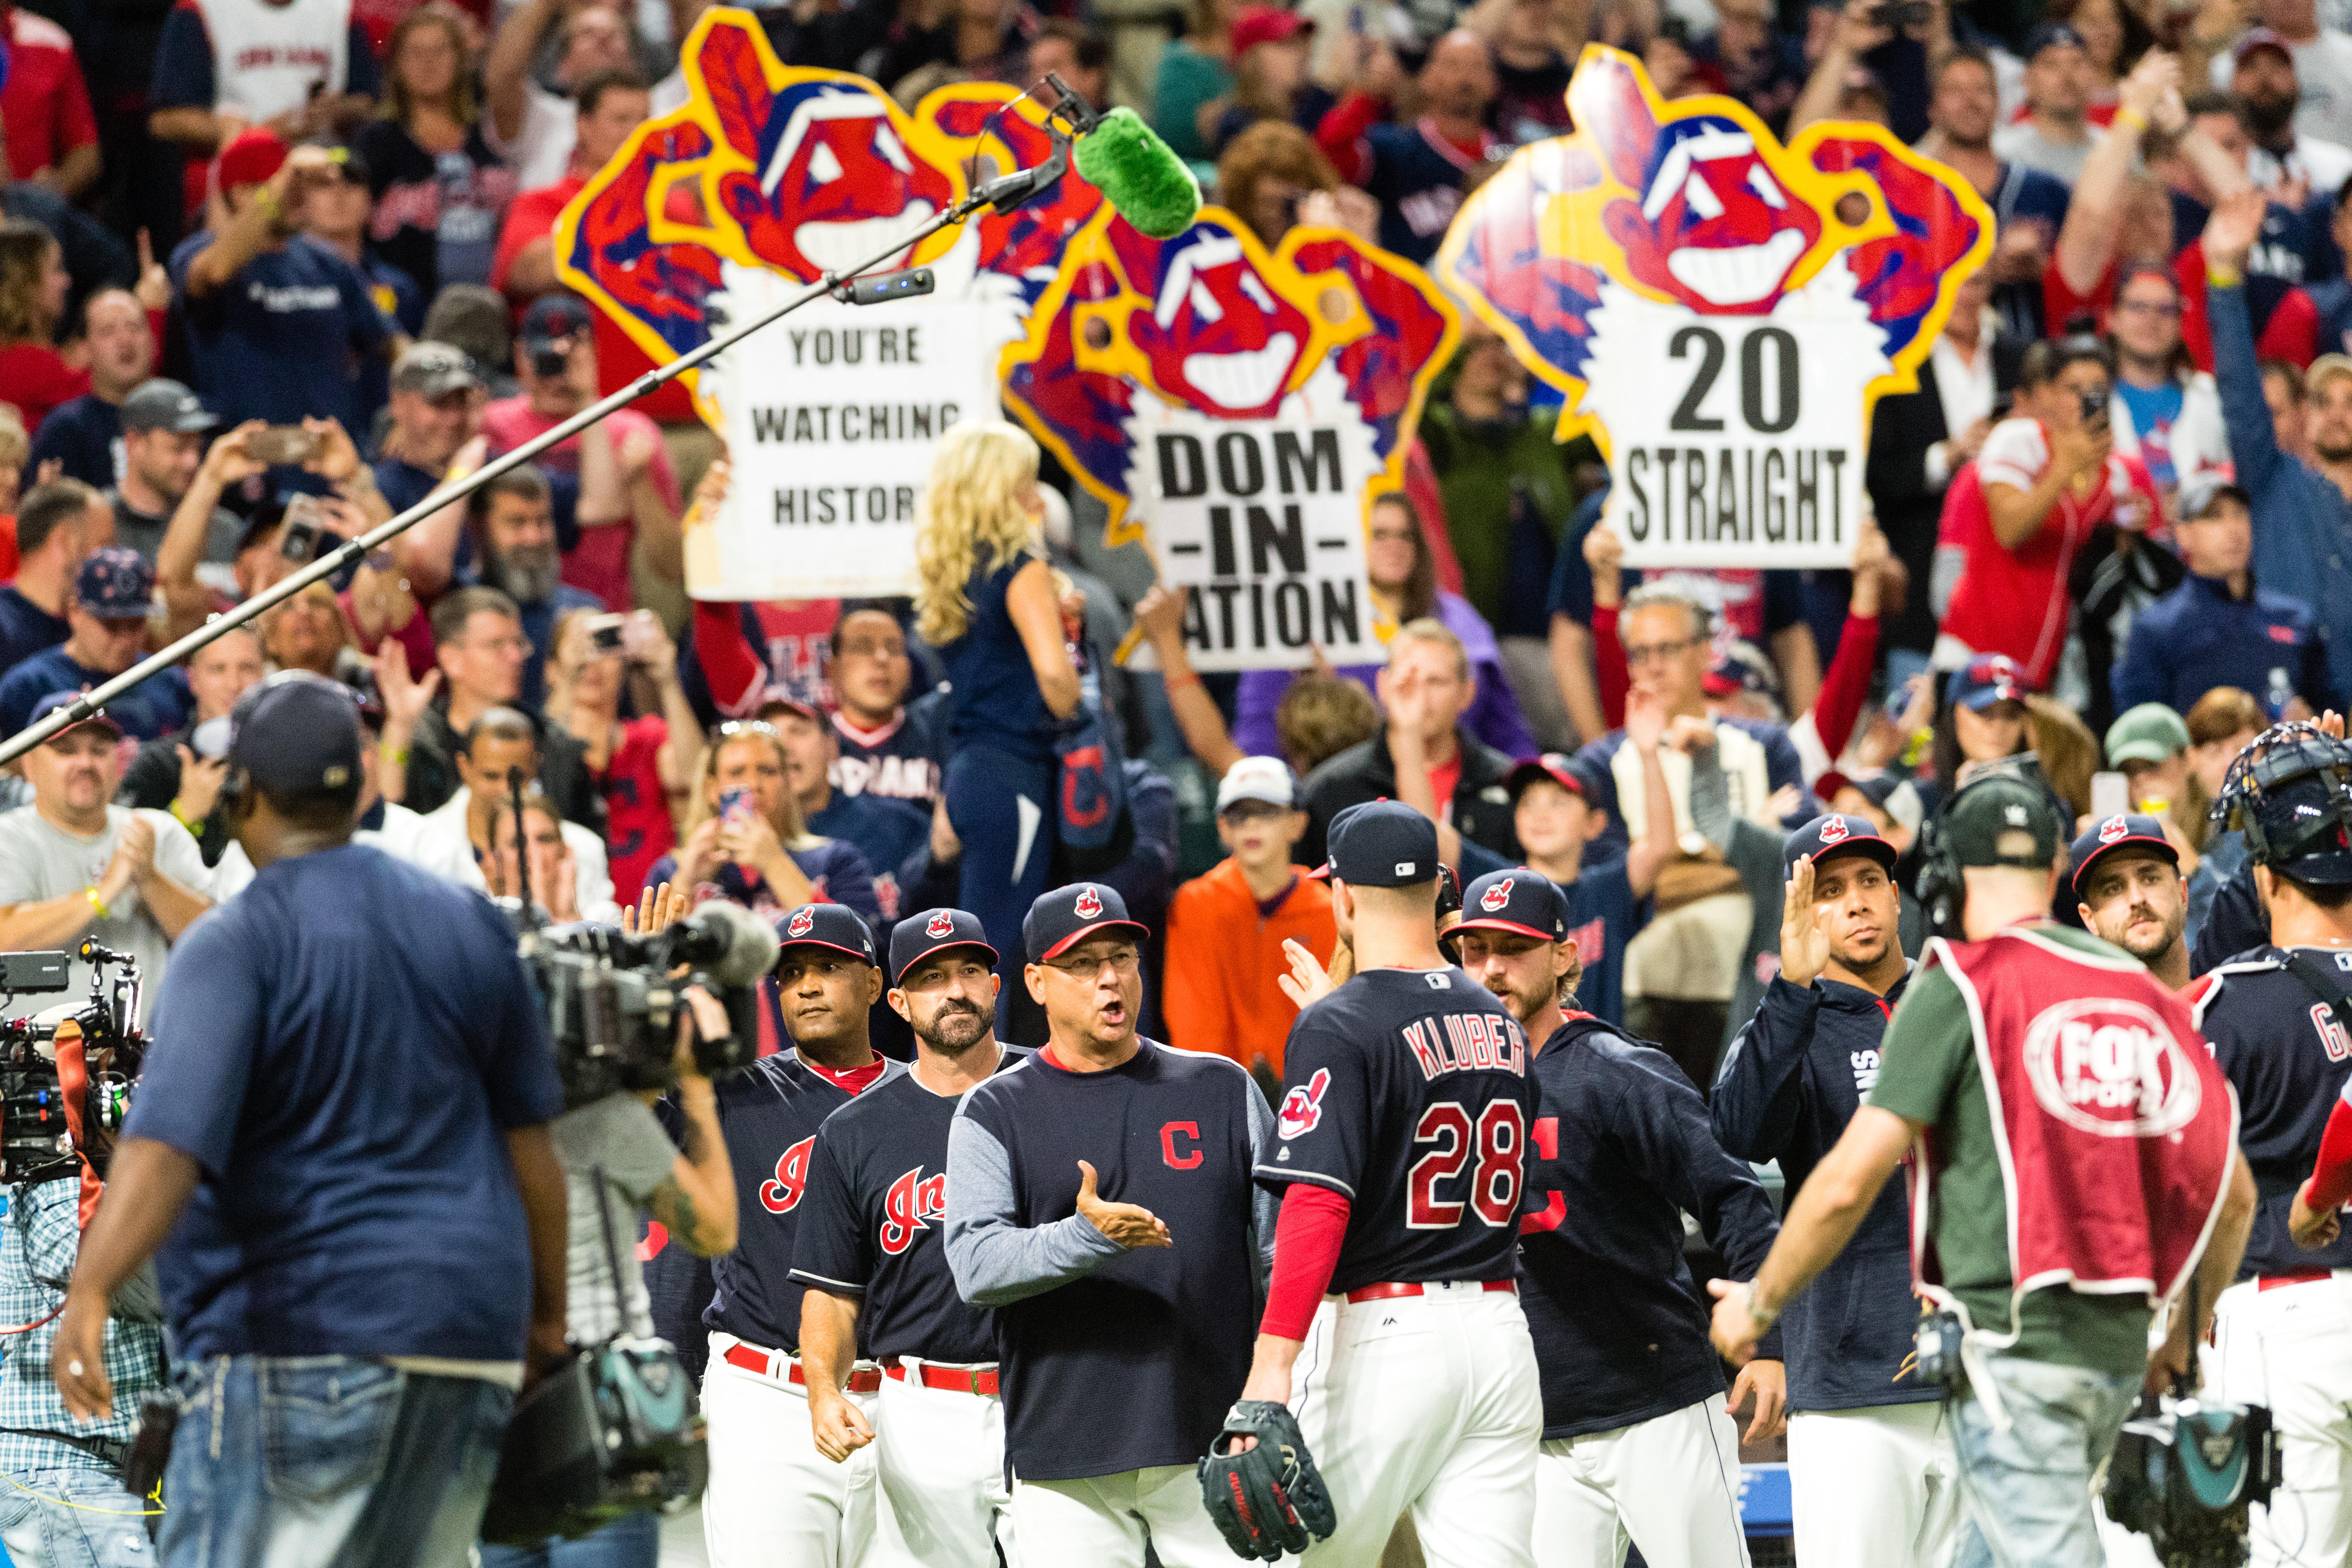 Unstoppable Cleveland Indians set baseball record with 21st straight win, Cleveland Guardians